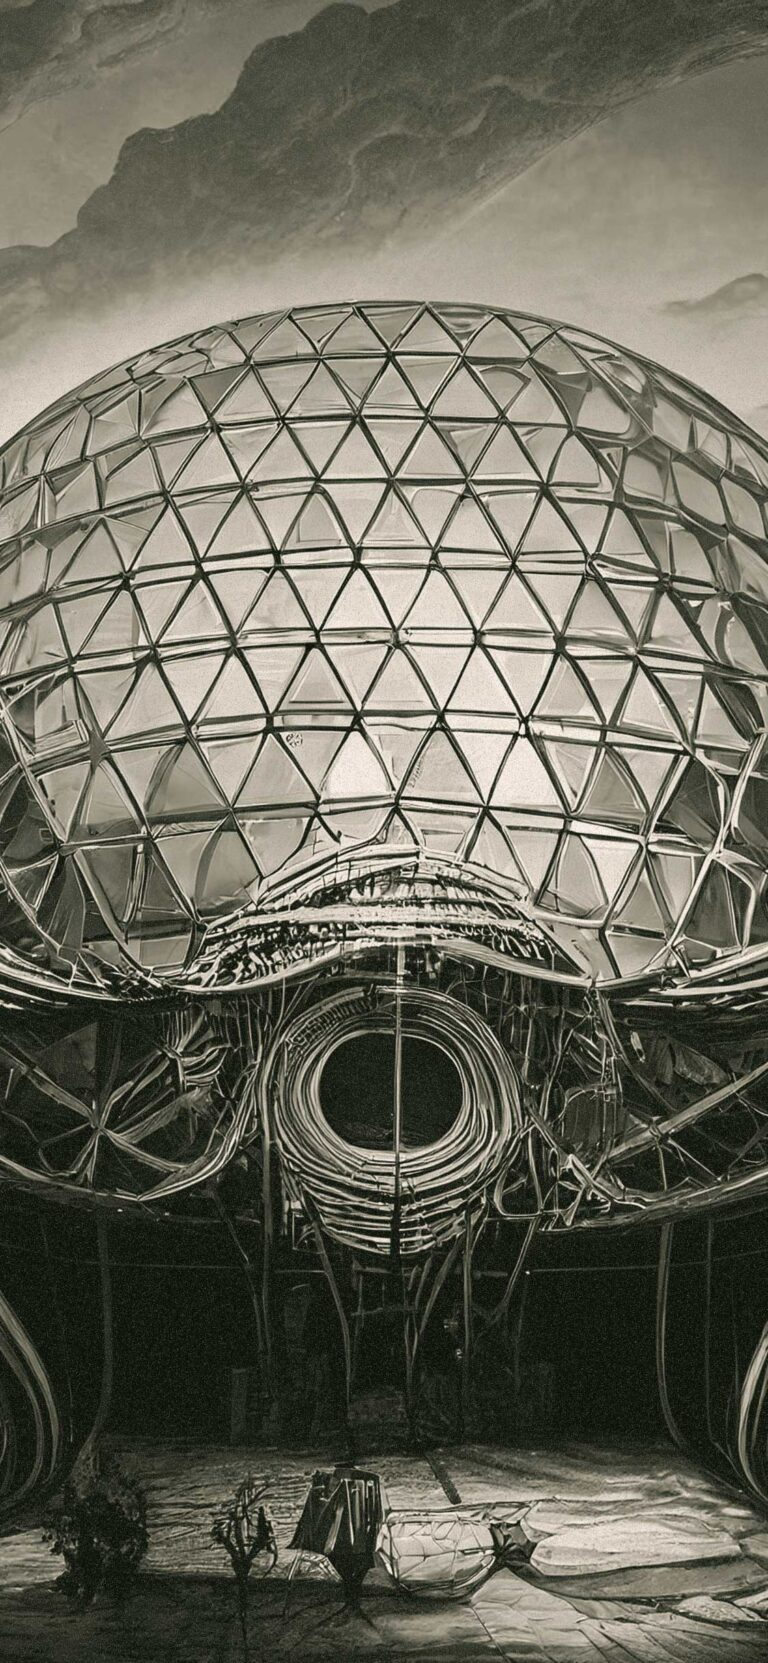 if Hans Rudolf Giger had some dome ideas … 